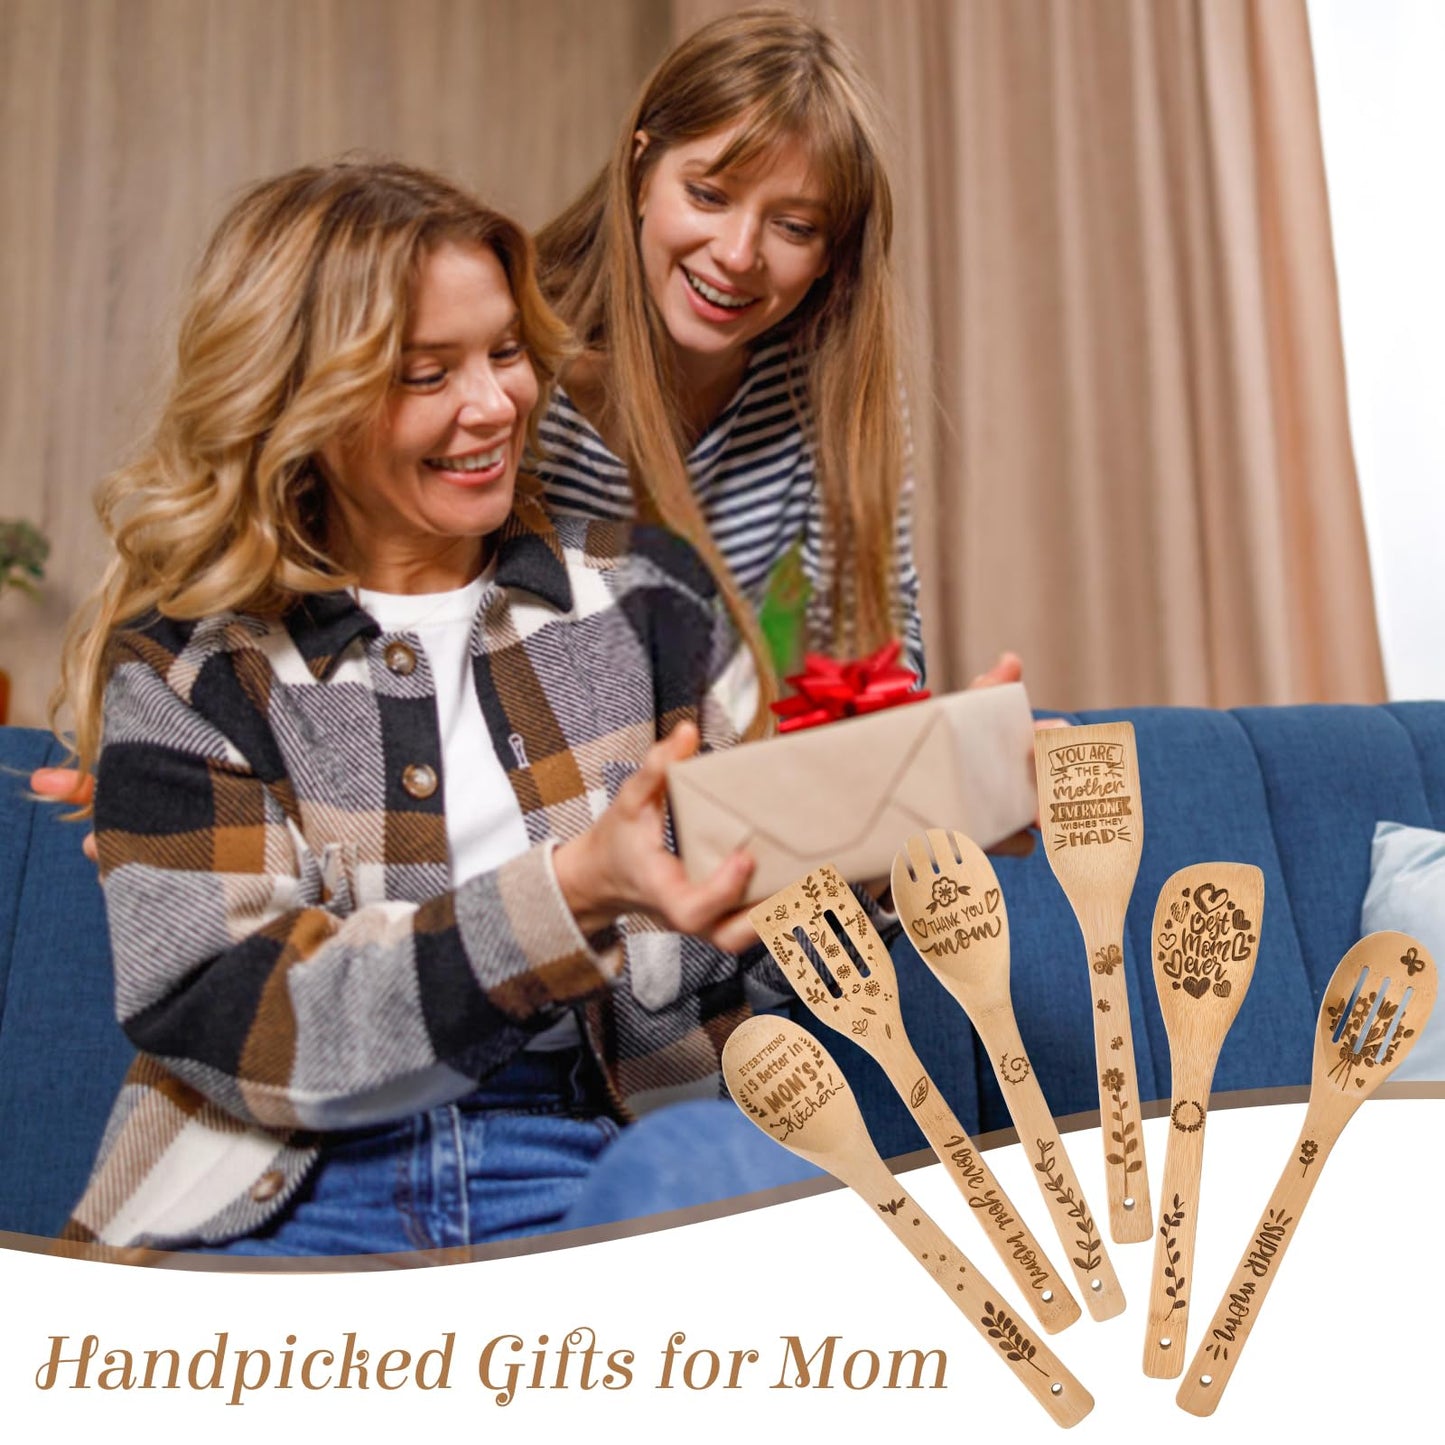 Mothers Day Mom Gifts for Mom Grandma Wife from Husband Daughter Son -Wooden Cooking Spoons Set - Mother's, Christmas,Birthday, Anniversary Kitchen Cooking Presents Ideas for Women Her